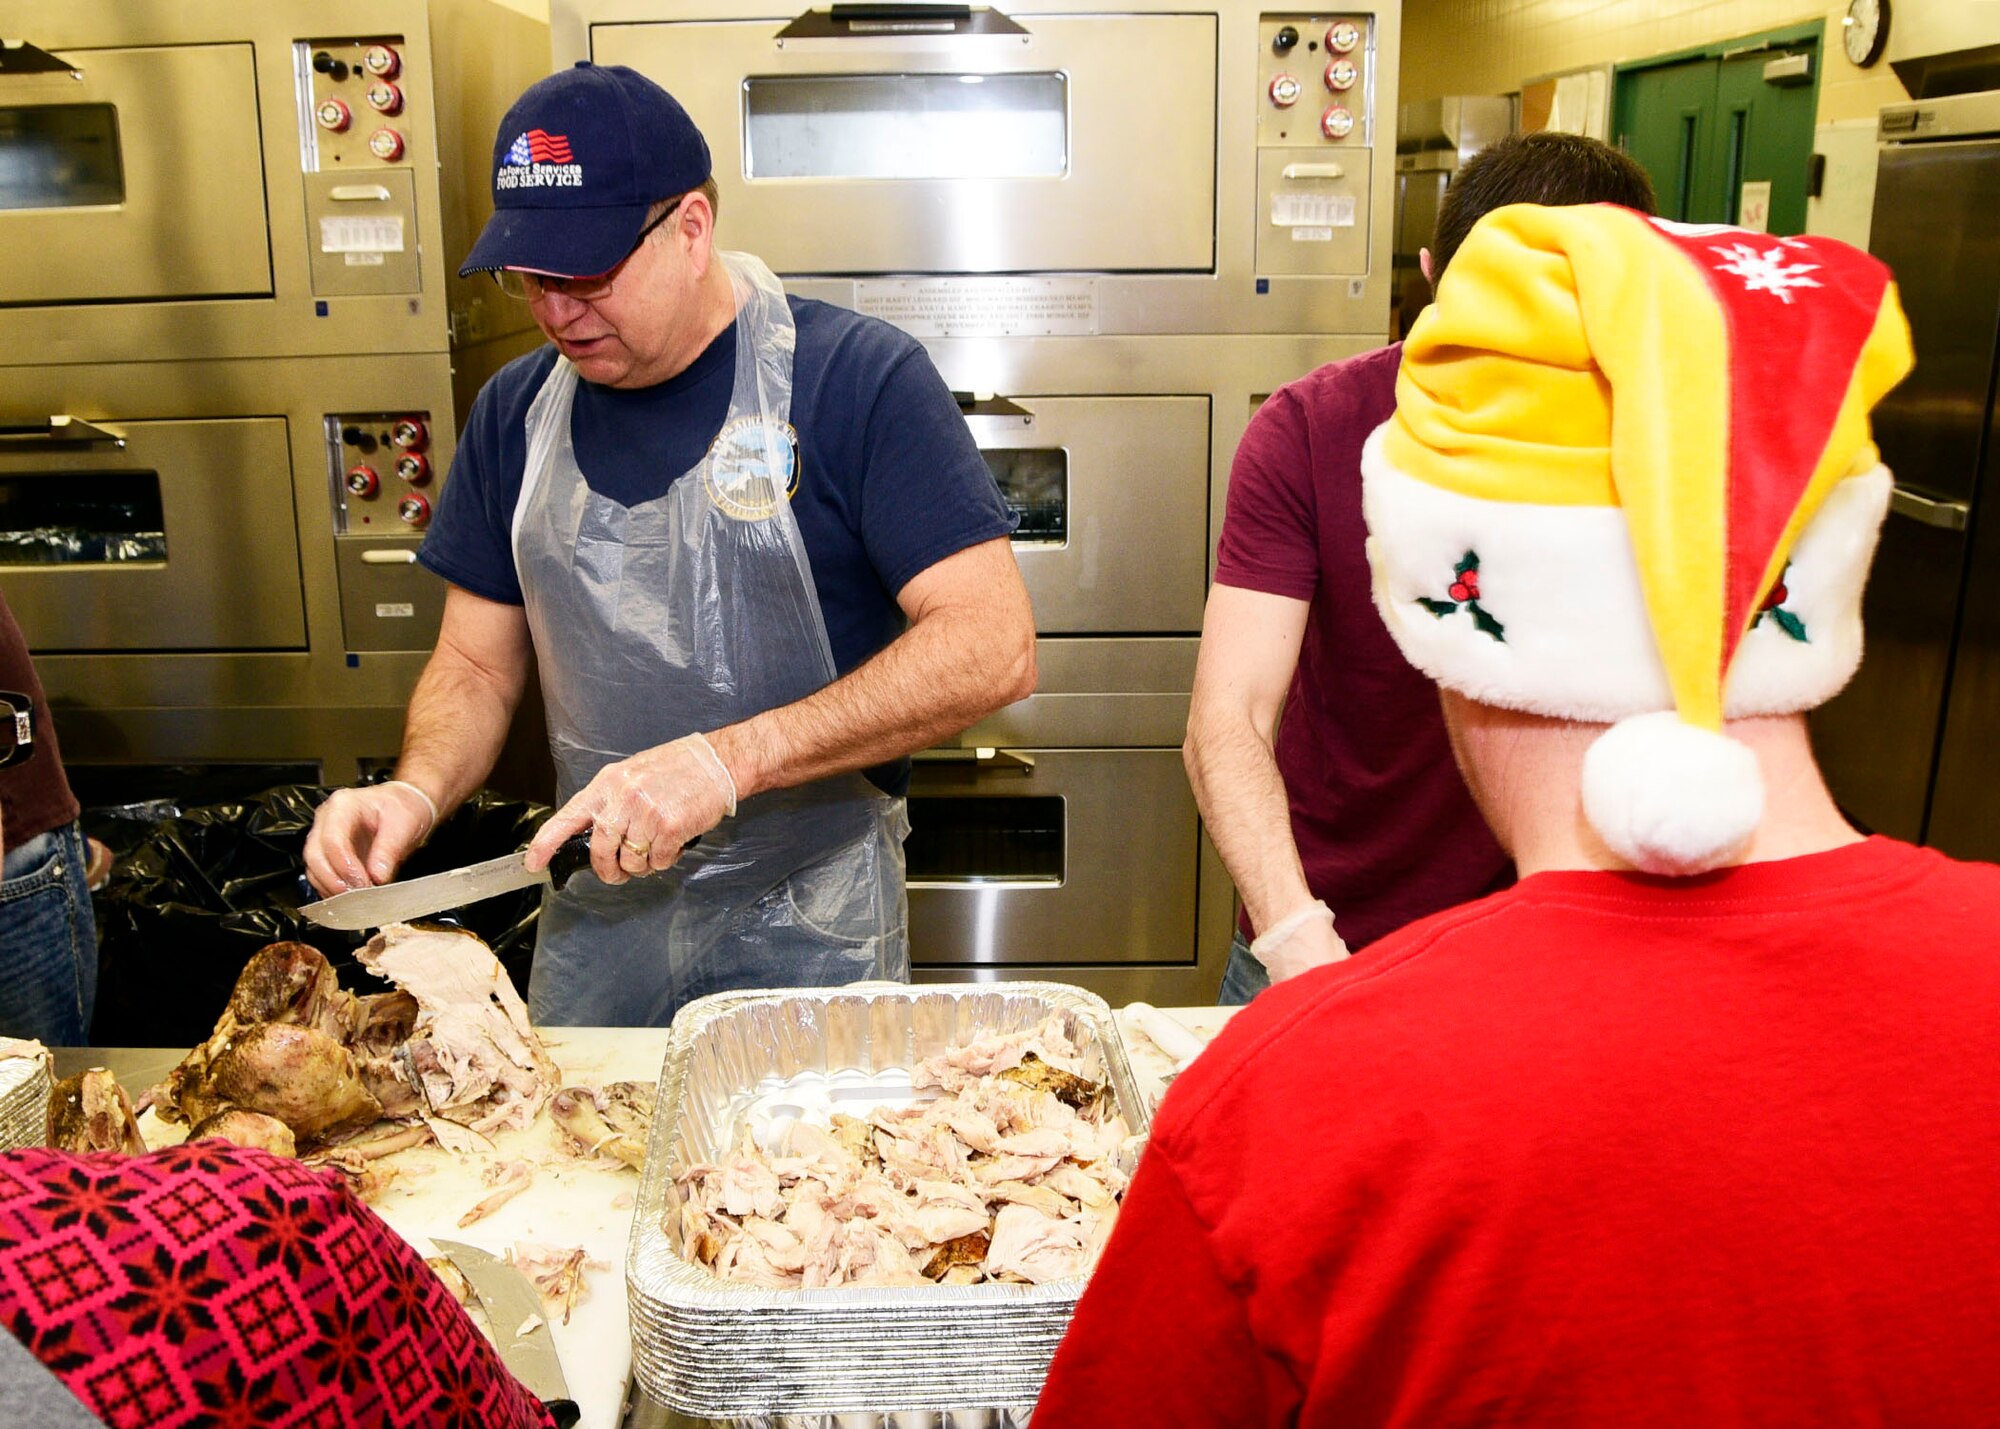 120th Airlift Wing Command Chief Master Sgt. Steven Lynch carves a turkey at the 120th Airlift Wing Dining Facility at the Great Falls International Airport in Great Falls, Montana Dec. 24, 2017. Montana Air National Guard personnel volunteered to prepare 50 turkeys, dressing and gravy and delivered the food to the Great Falls Senior Citizen Center to be served during the 25th Annual Danny Berg Memorial Christmas Dinner. (U.S. Air National Guard photo/Senior Master Sgt. Eric Peterson)